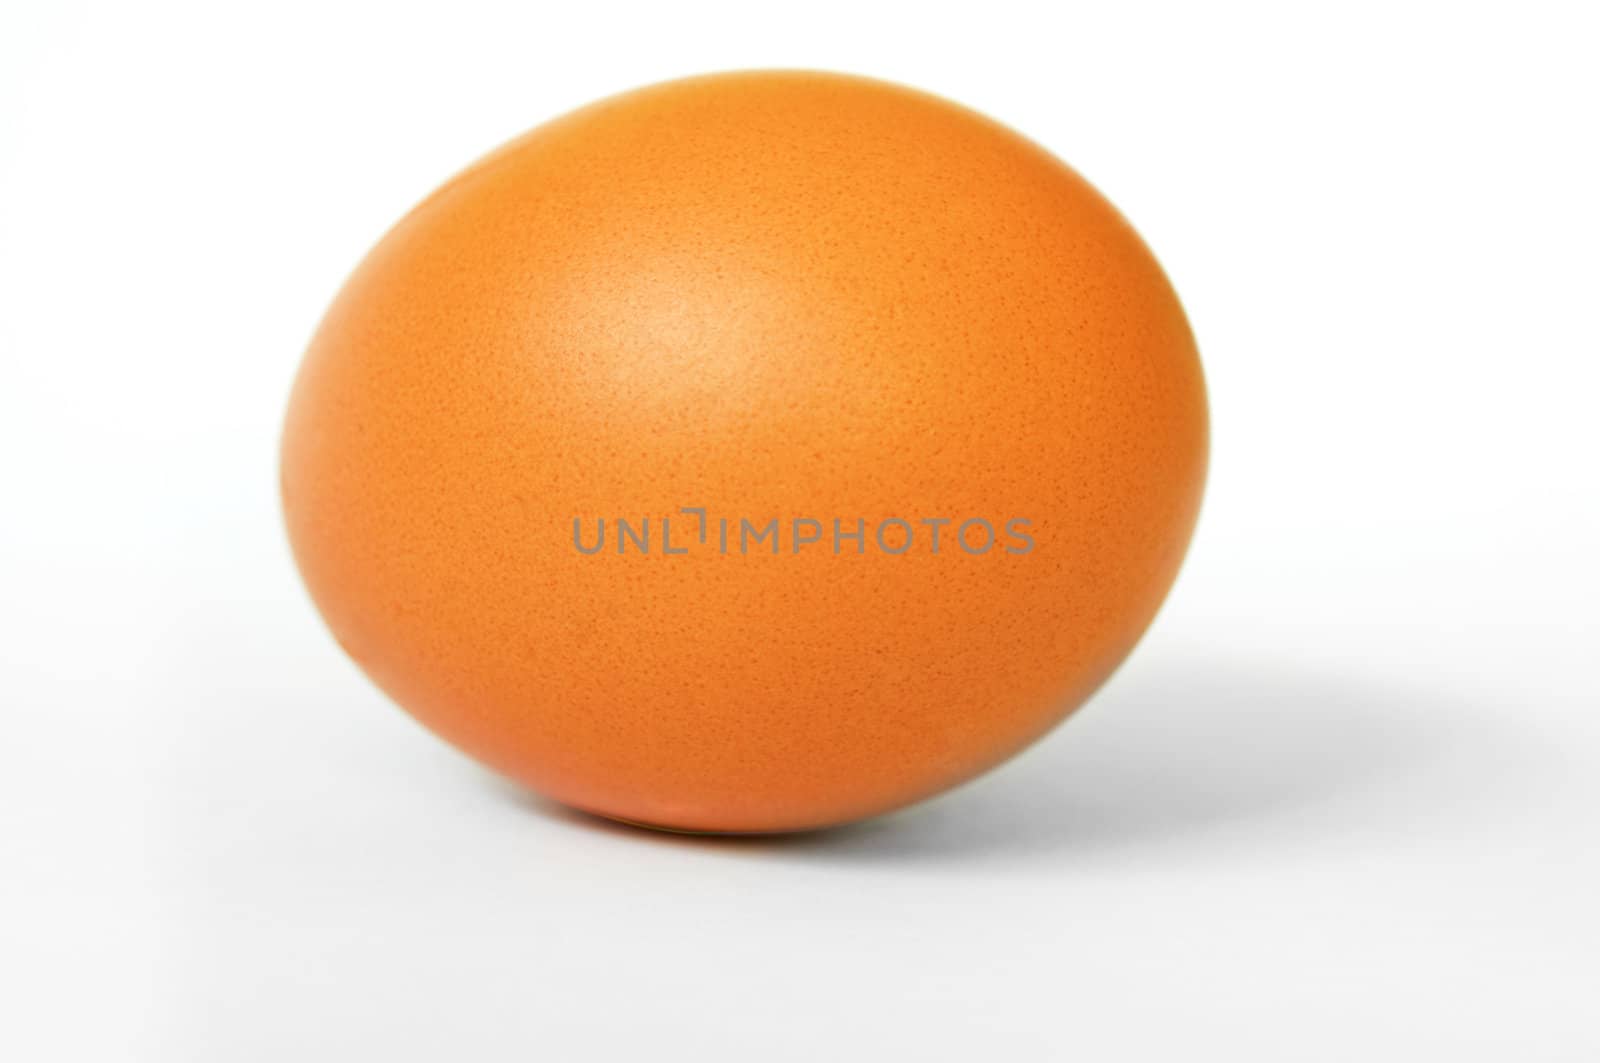 One brown egg with soft shadow.